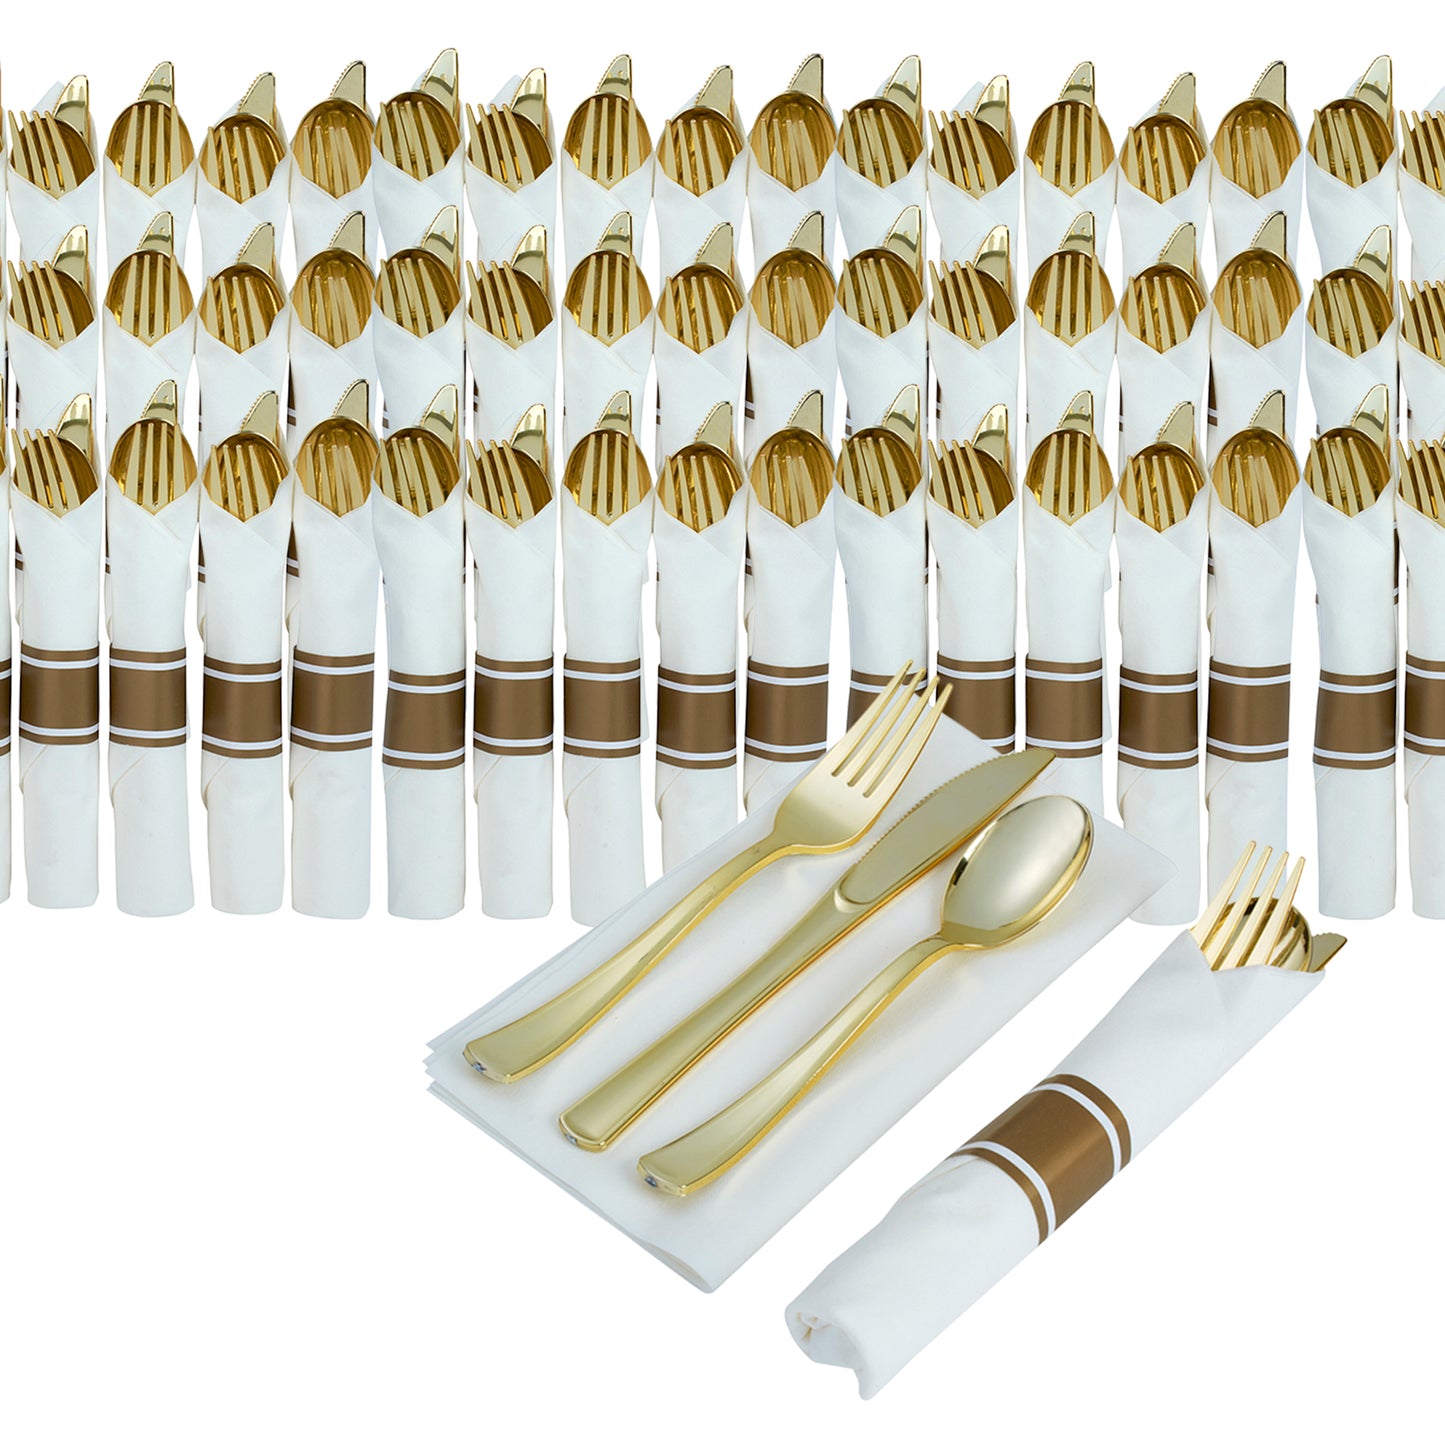 200 Piece Pre-rolled gold plastic silverware set (for 50 guests) In each napkin pack, you will find 1 fork, 1 knife, and 1 spoon, all wrapped up inside.